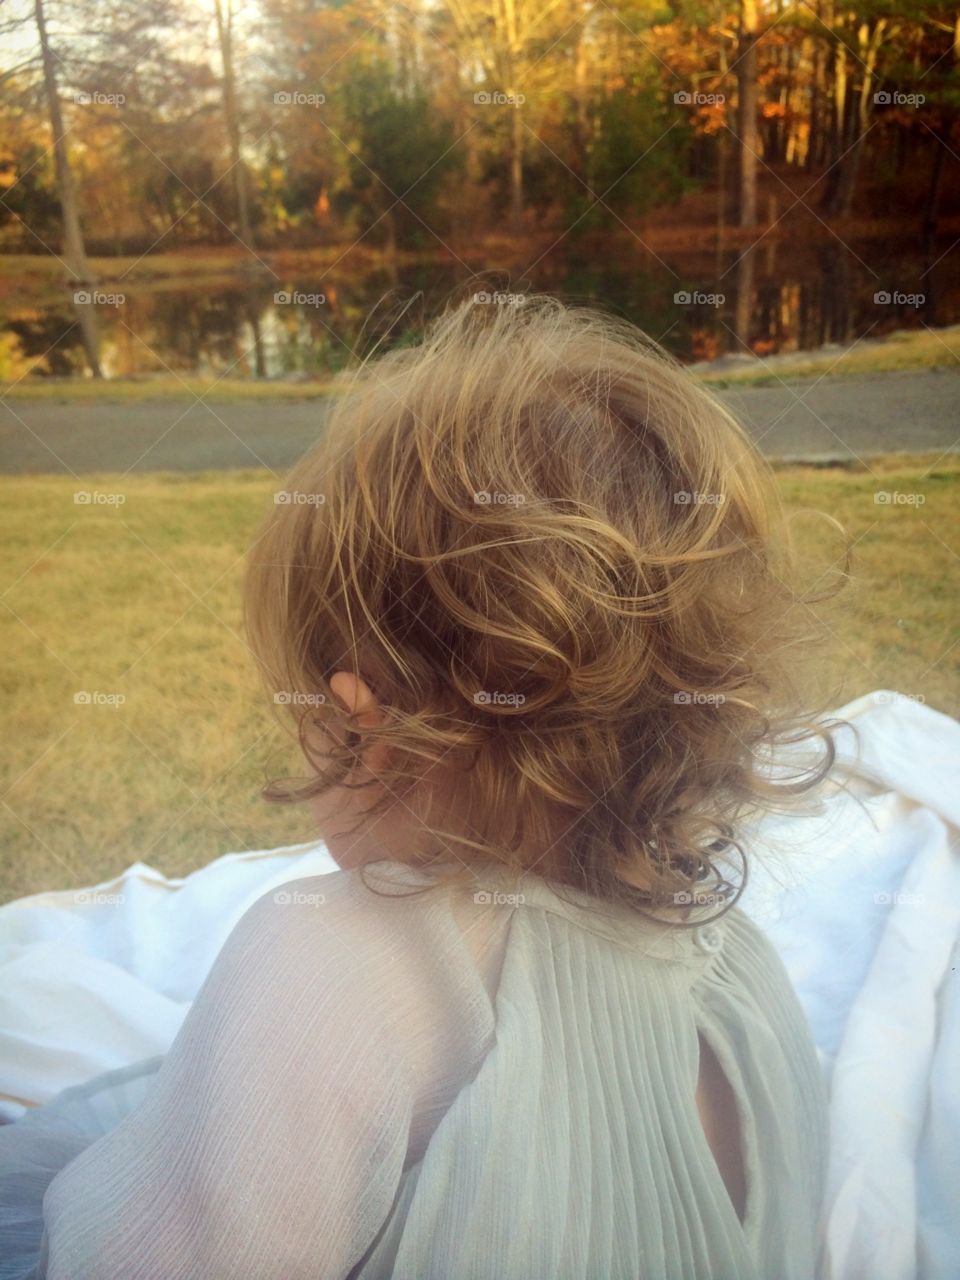 Curly hair on back of baby